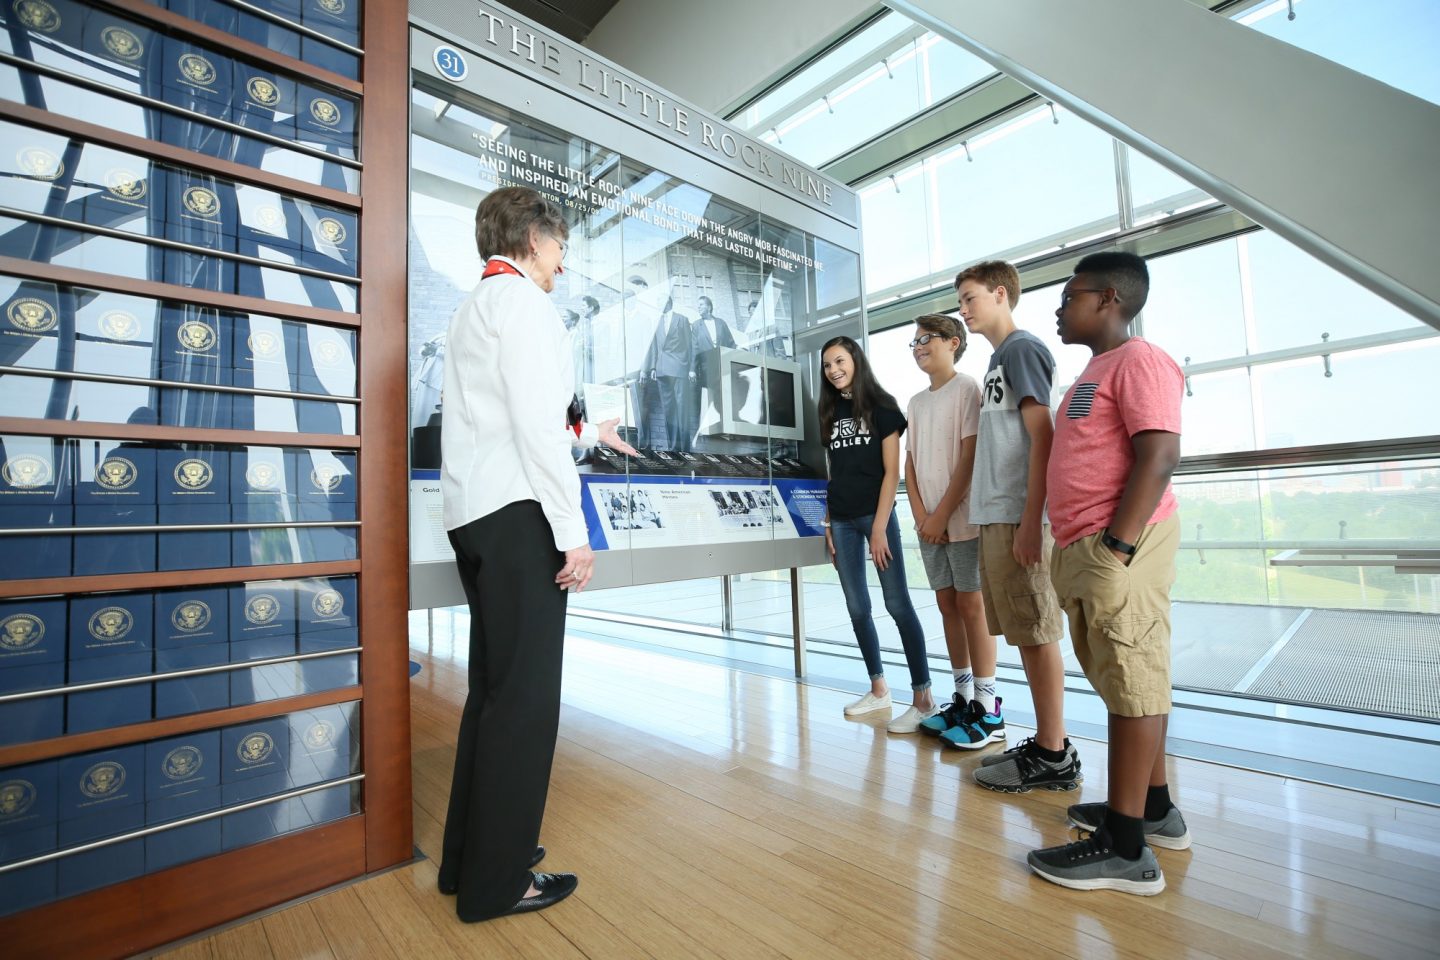 A docent and four students stand near at exhibit about the Little Rock Nine at the Clinton Presidential Center